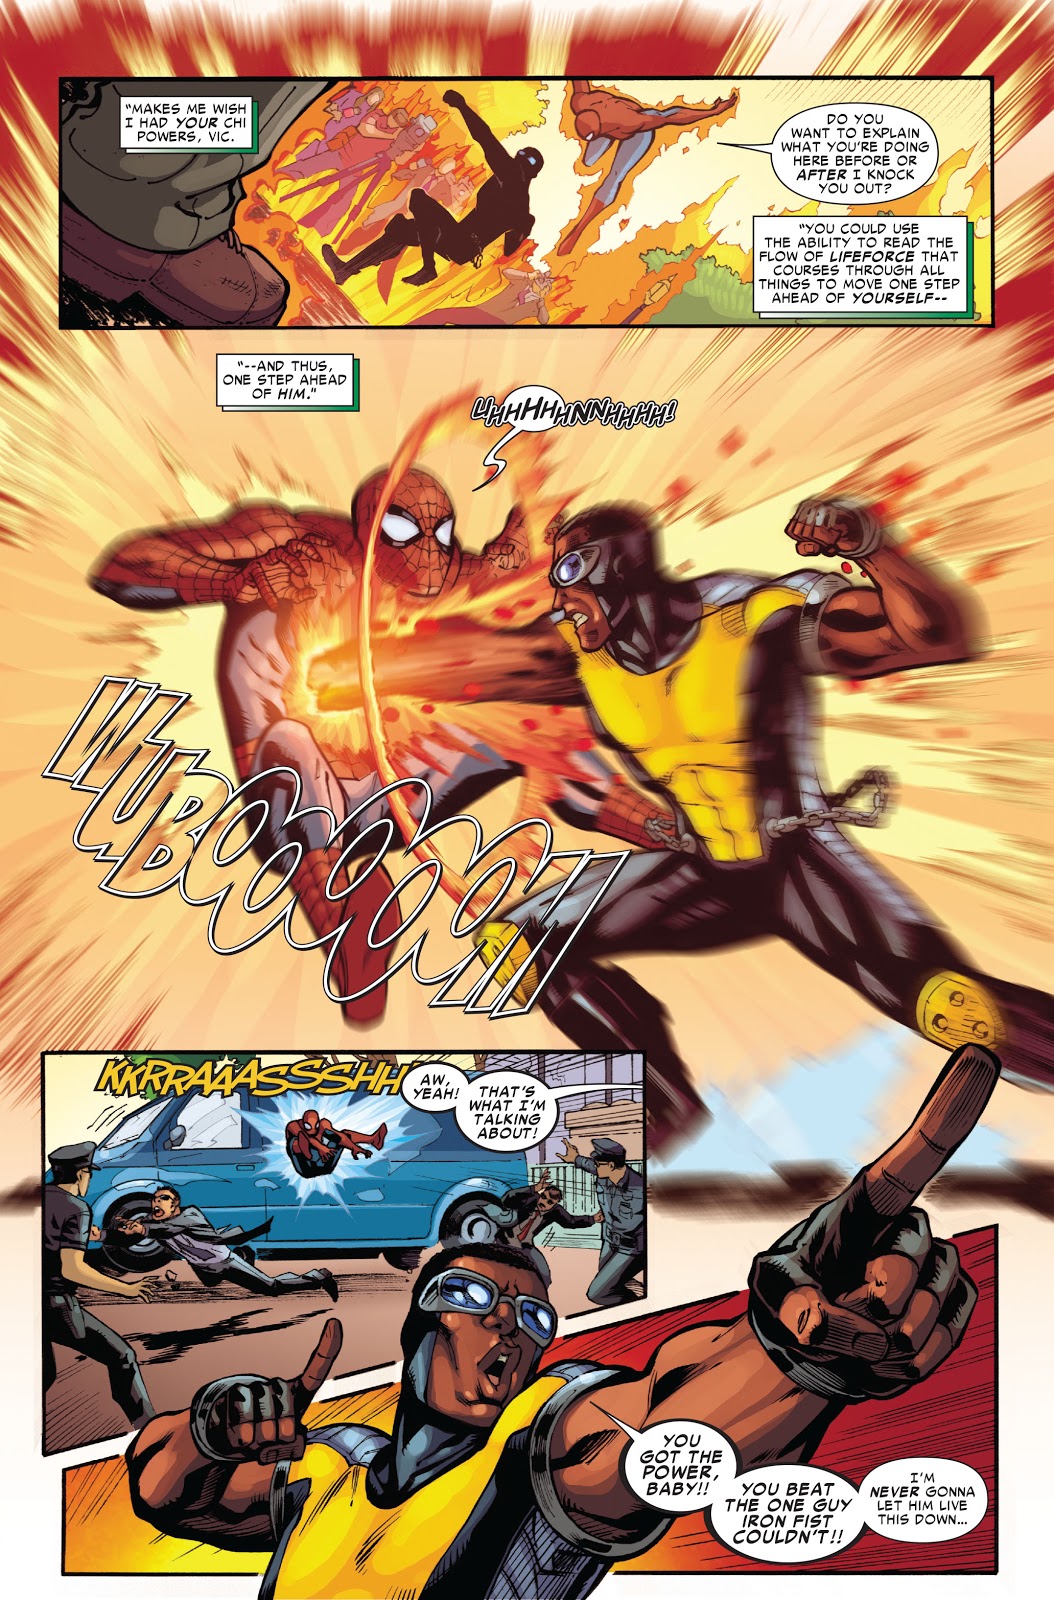 Iron Fist Can't Defeat Spider-Man